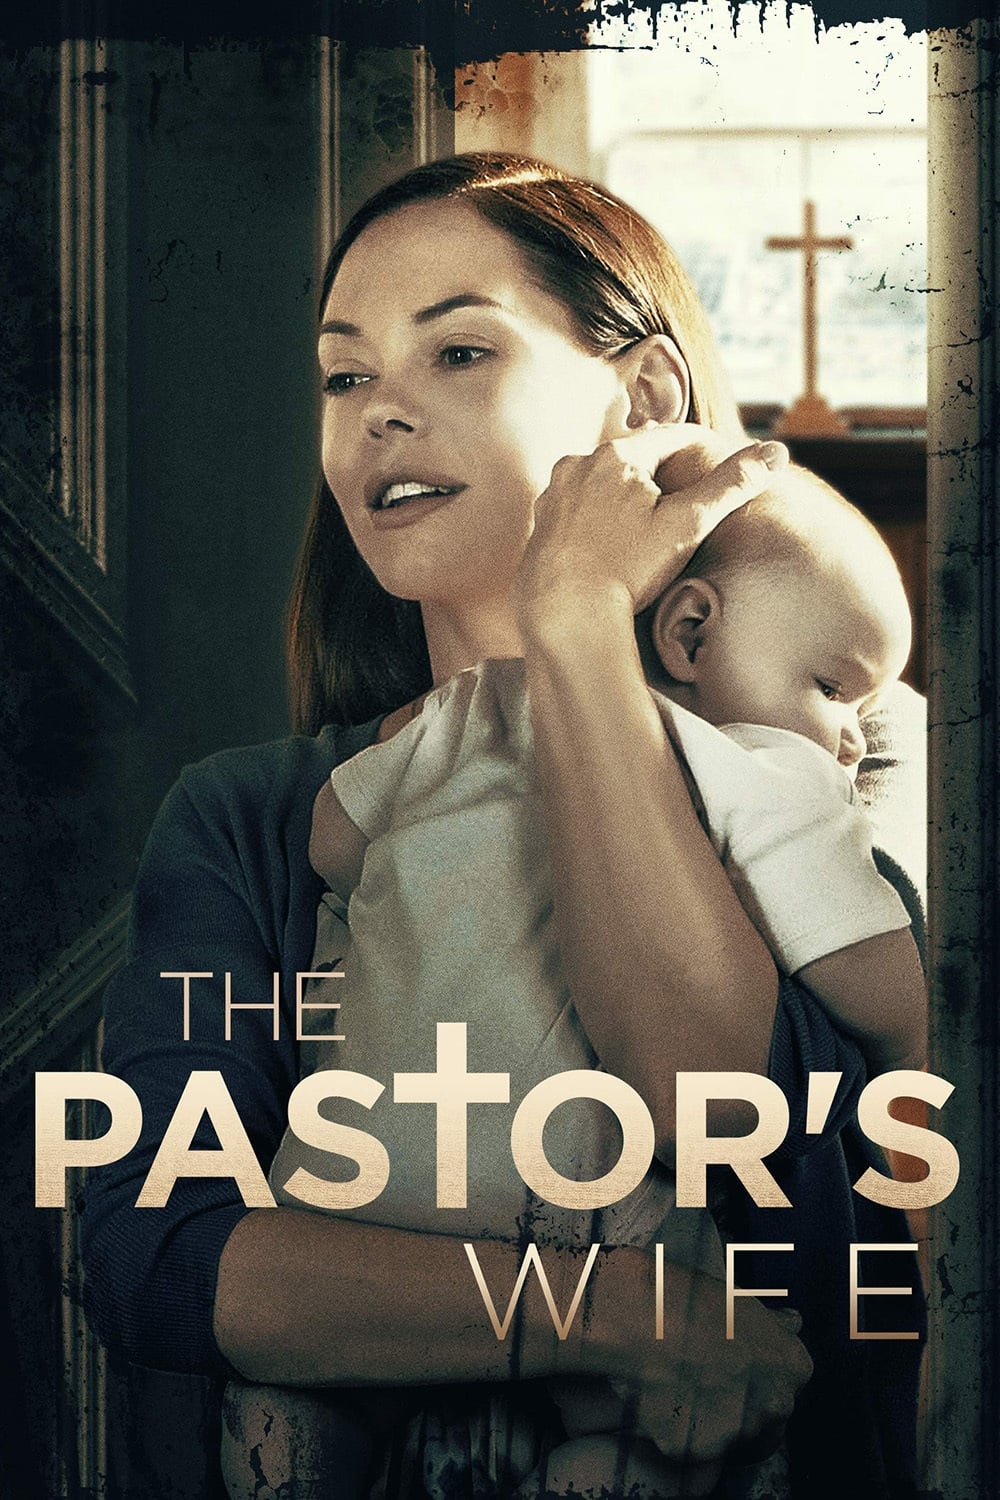 THE PASTOR S WIFE